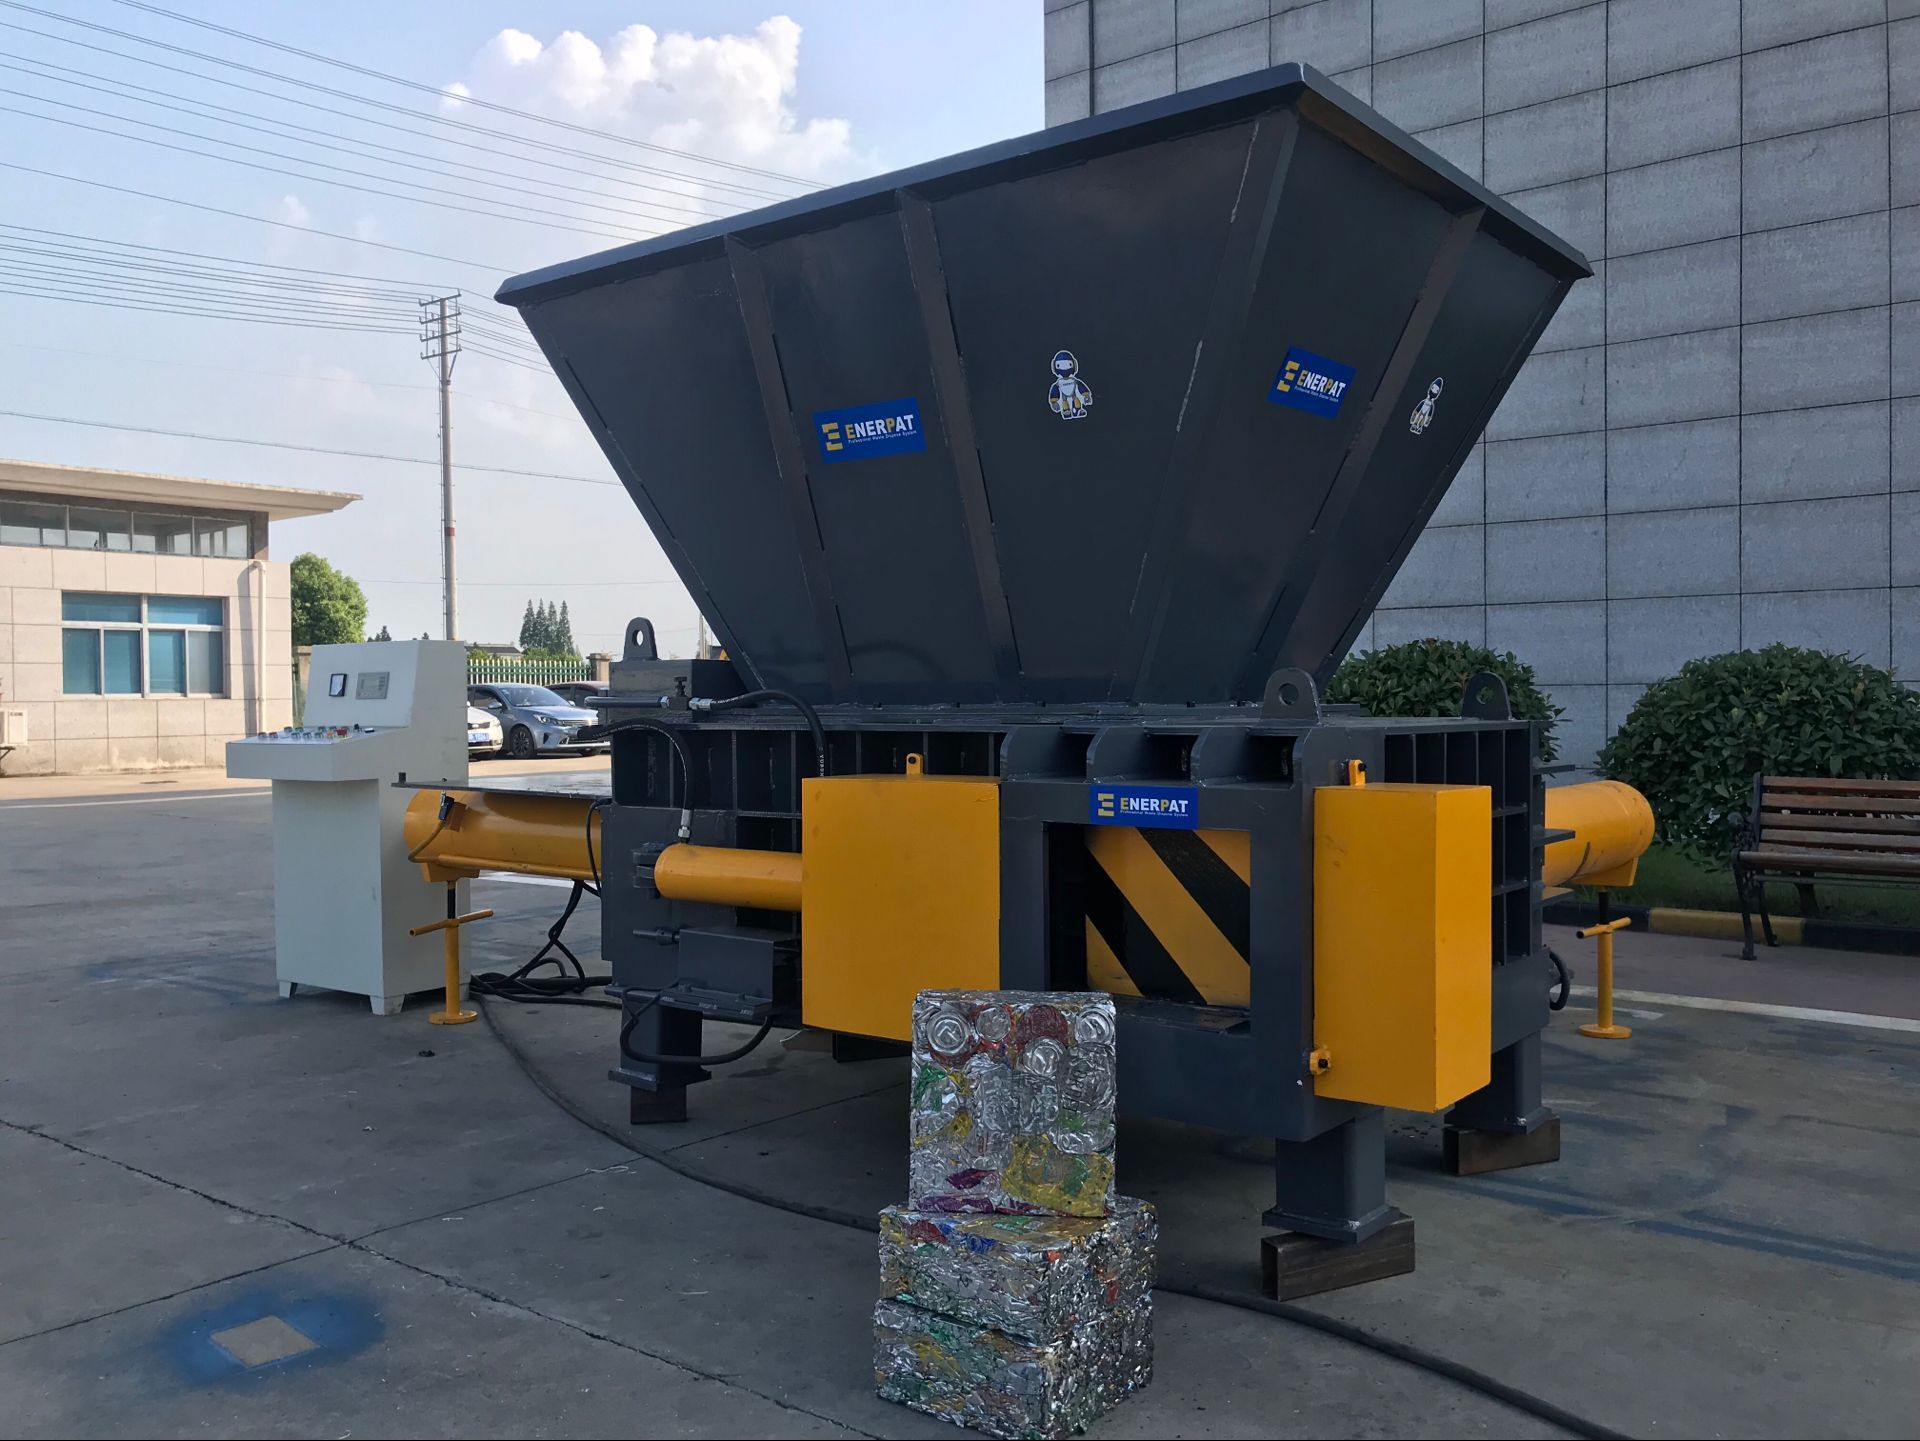 Universal High Quality Metal Baler Supplier for Aluminum Can